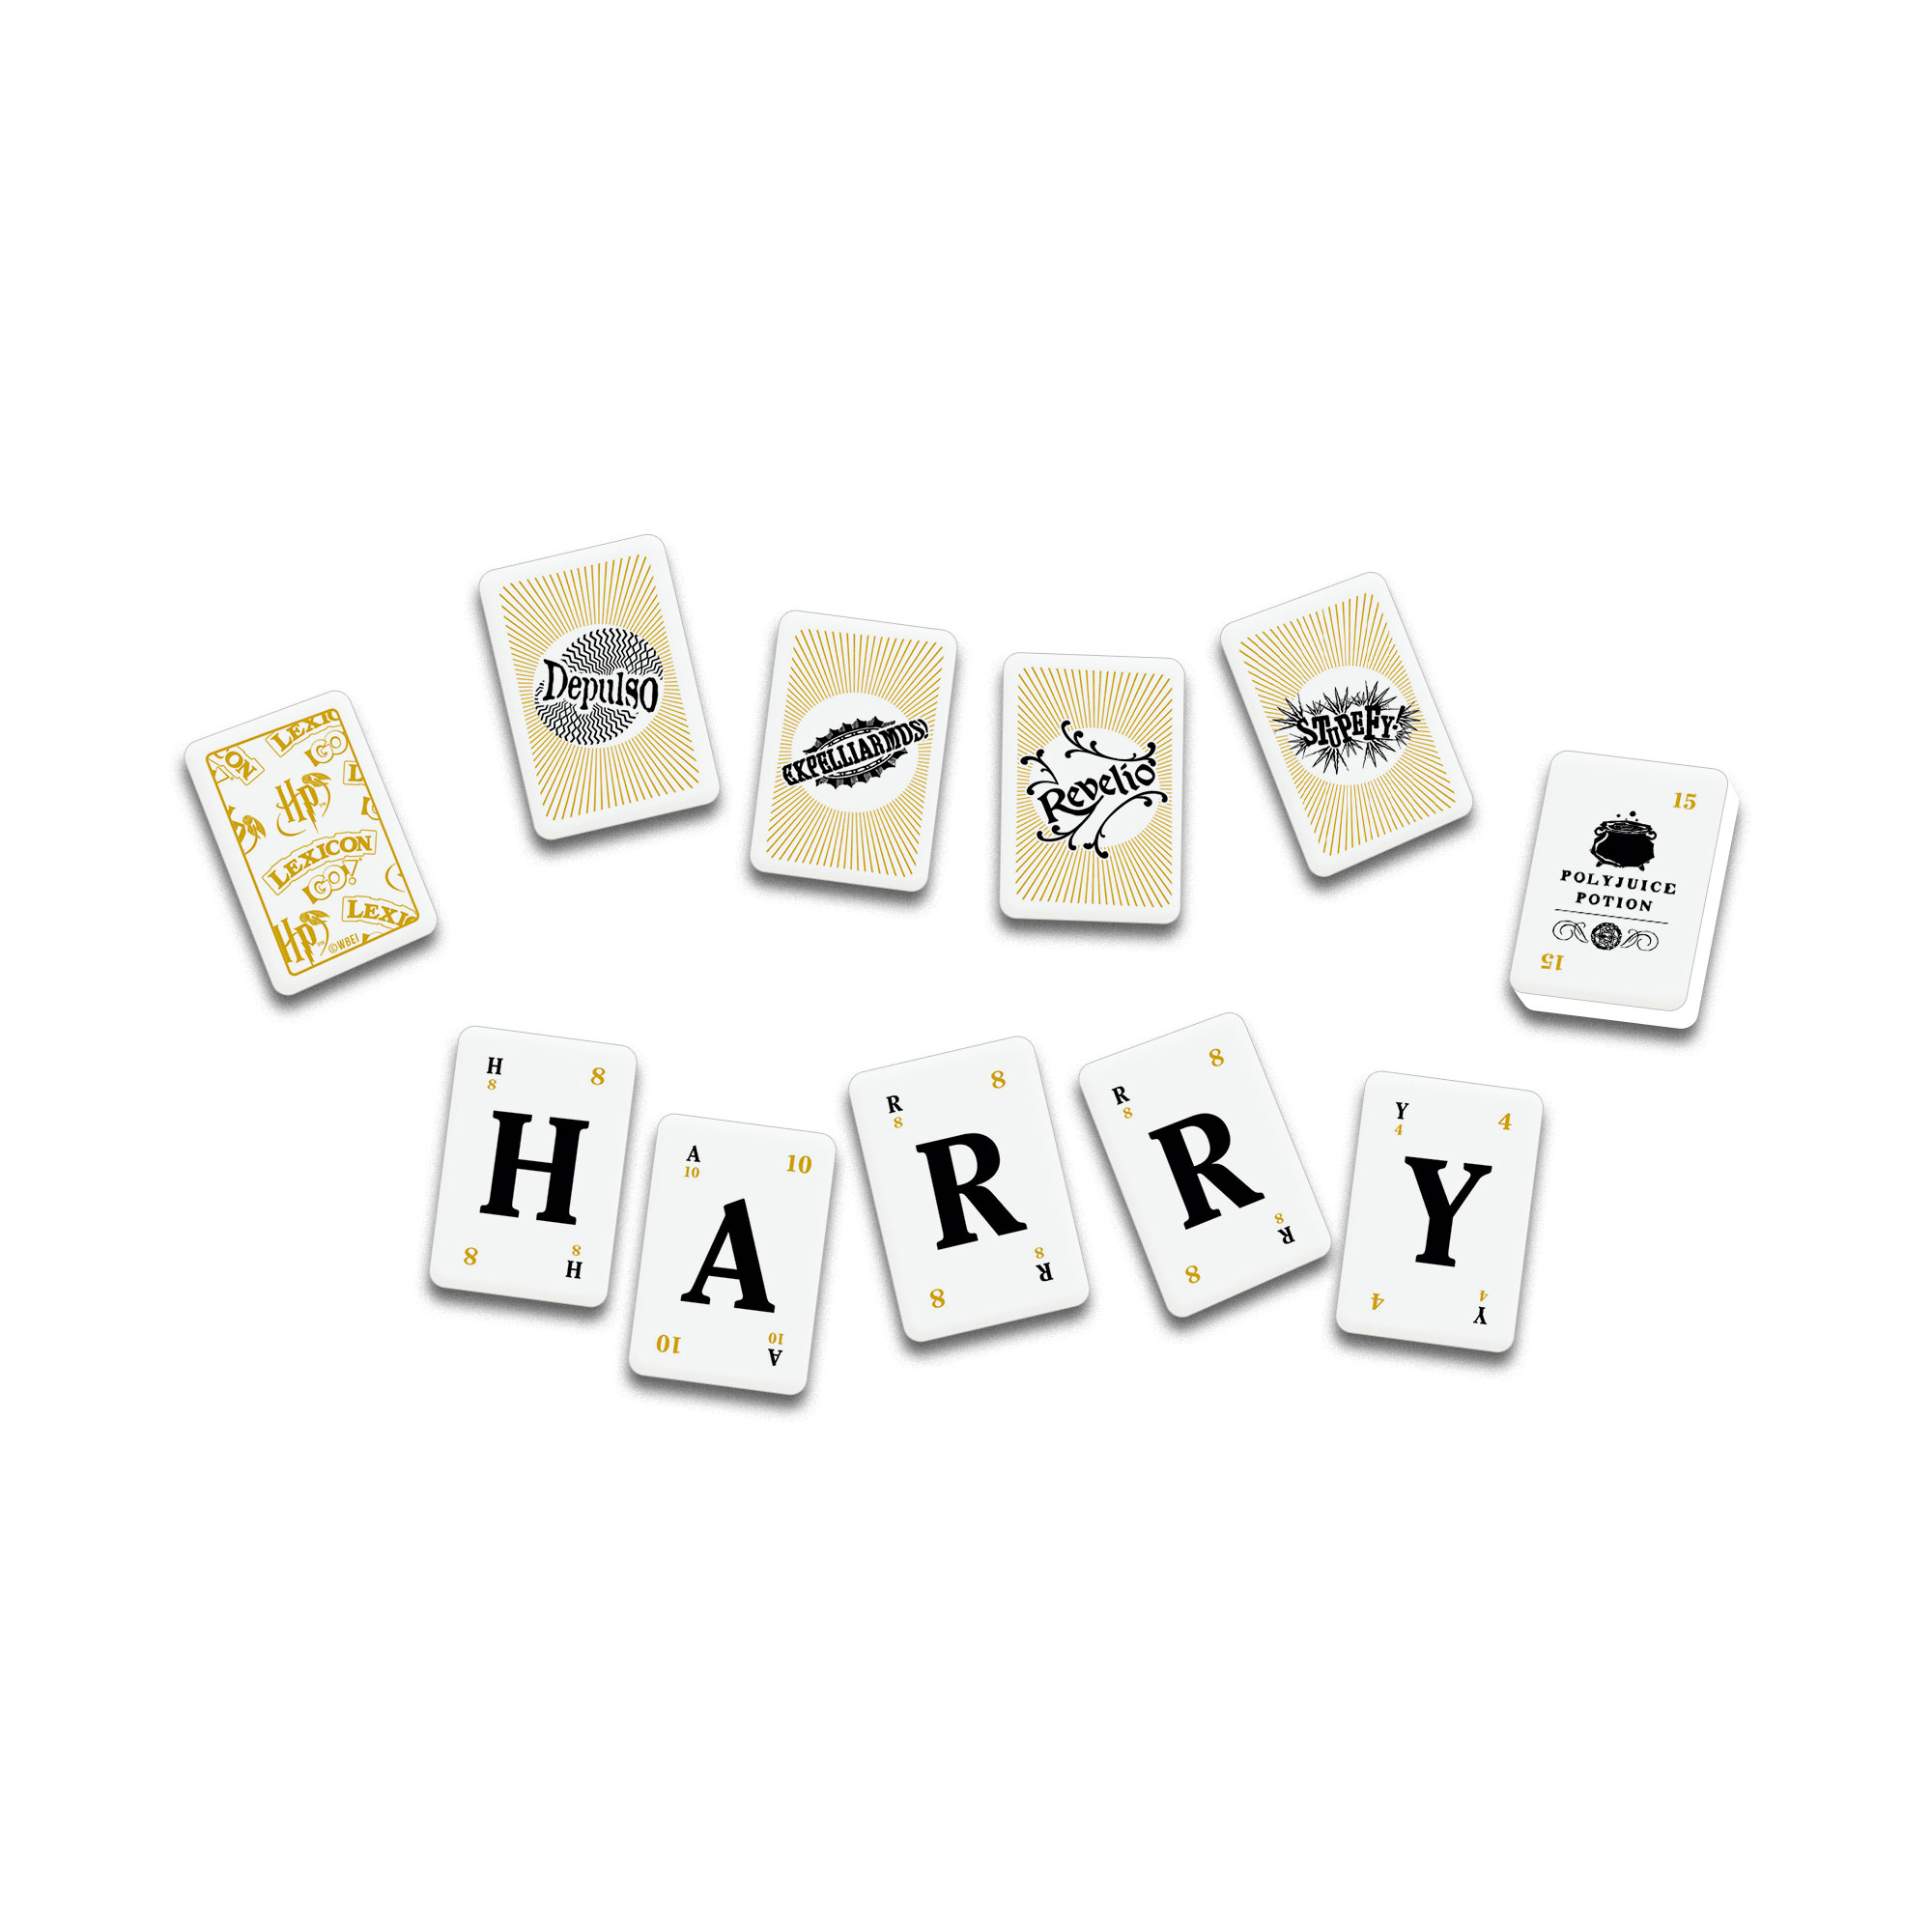 “Harry Potter” Lexicon GO! tiles spelling out “HARRY”